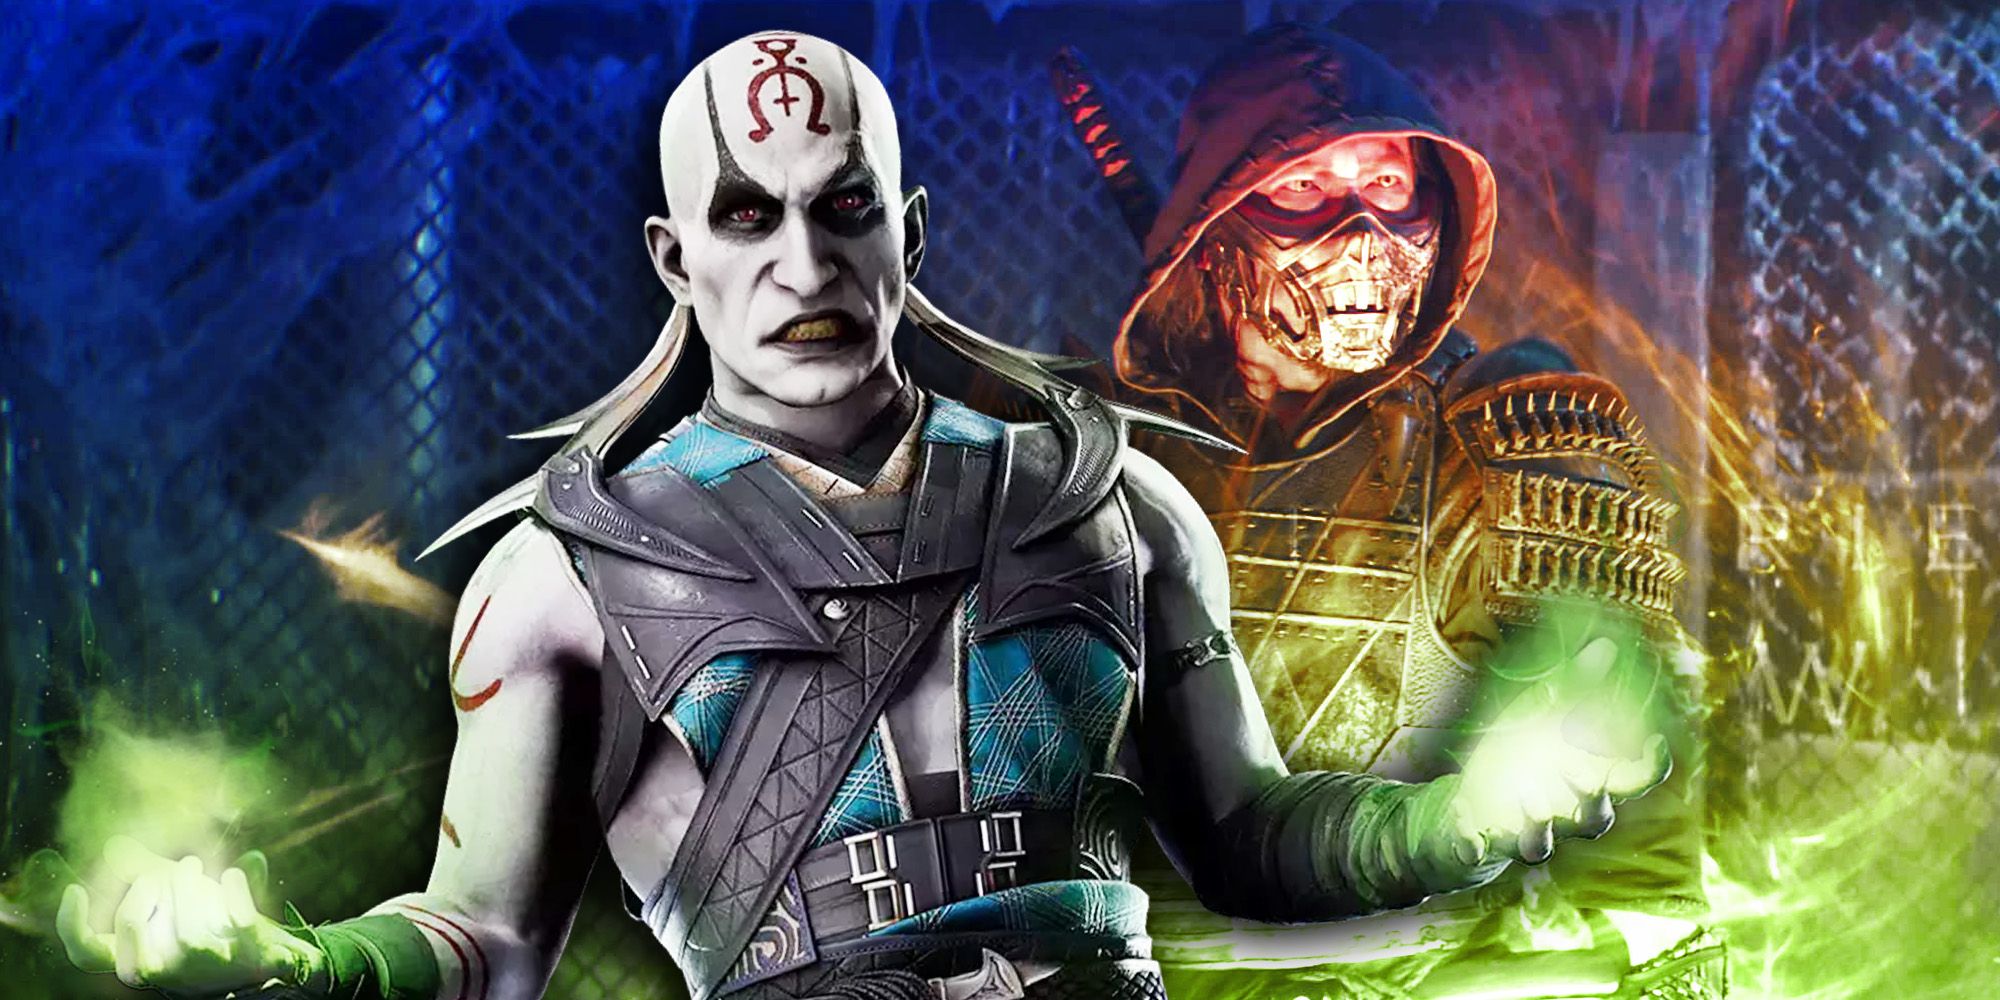 Quan-Chi from Mortal Kombat 11 and Scorprion from Mortal Kombat 2021 